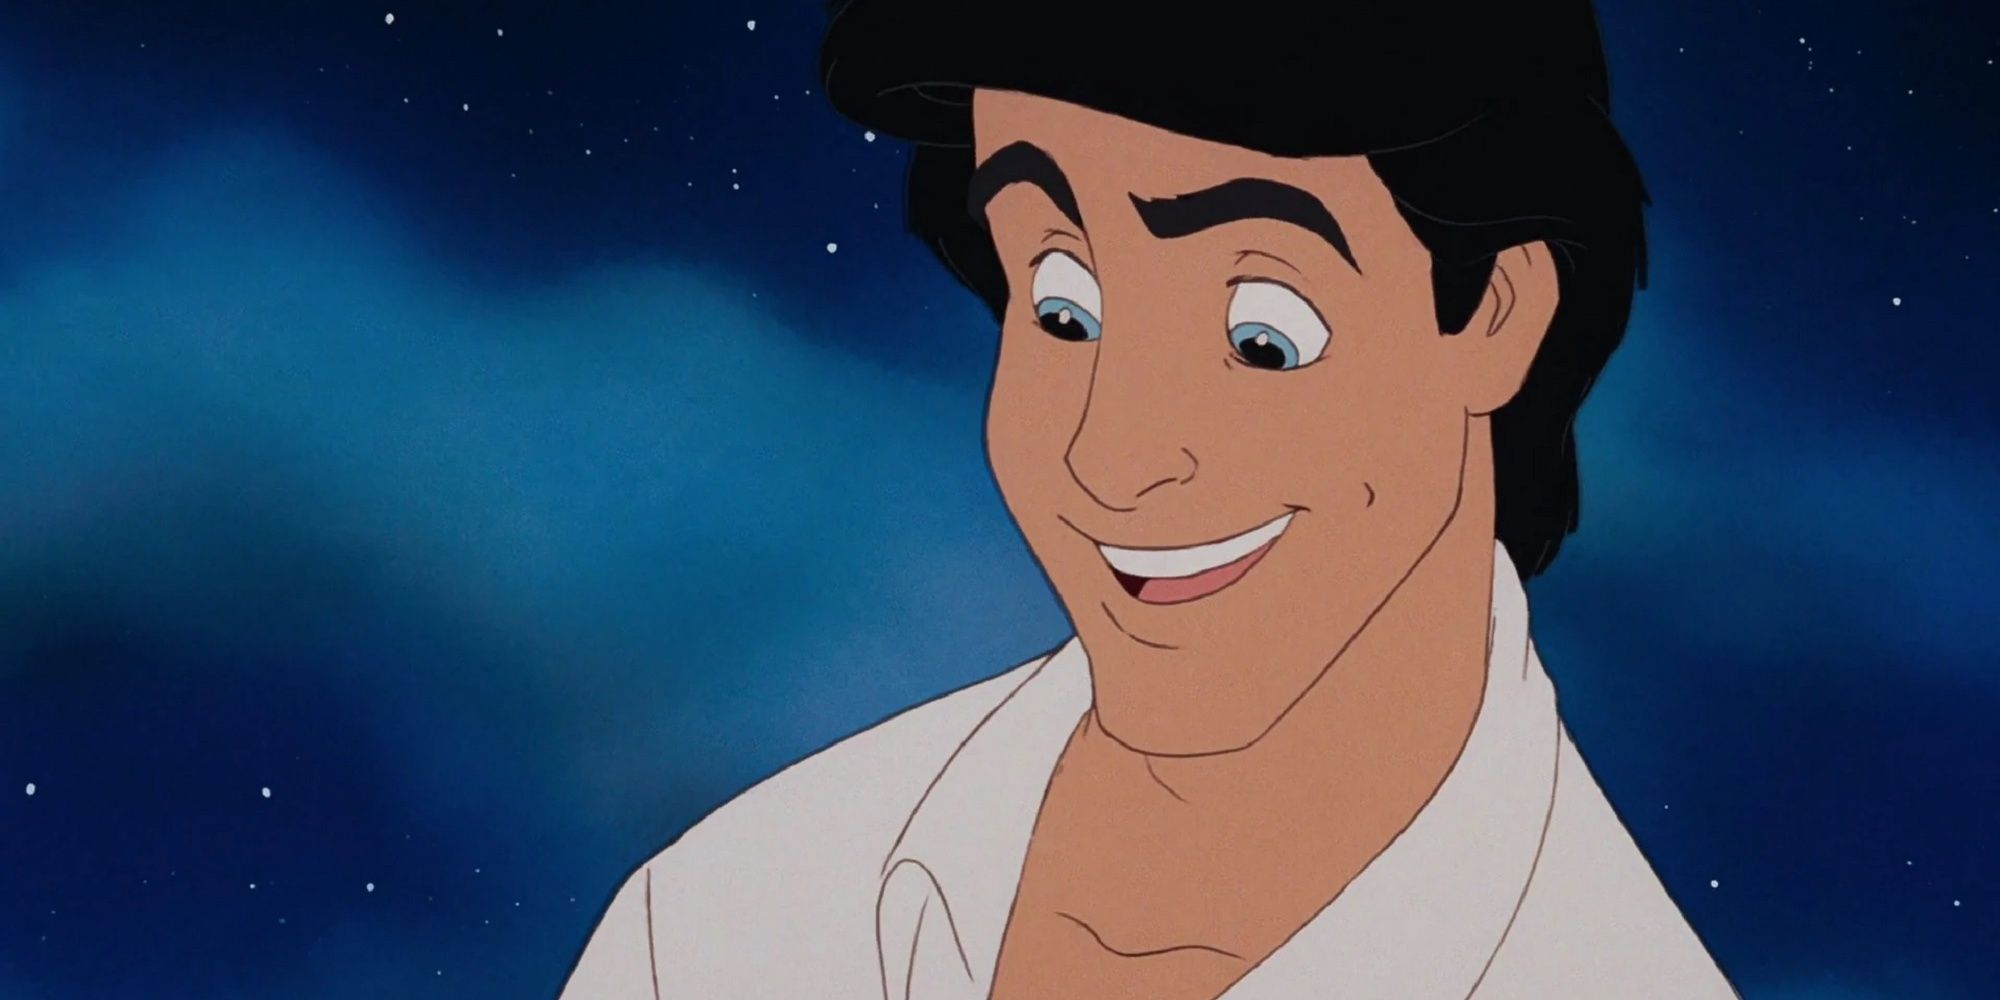 Prince Eric in The Little Mermaid.